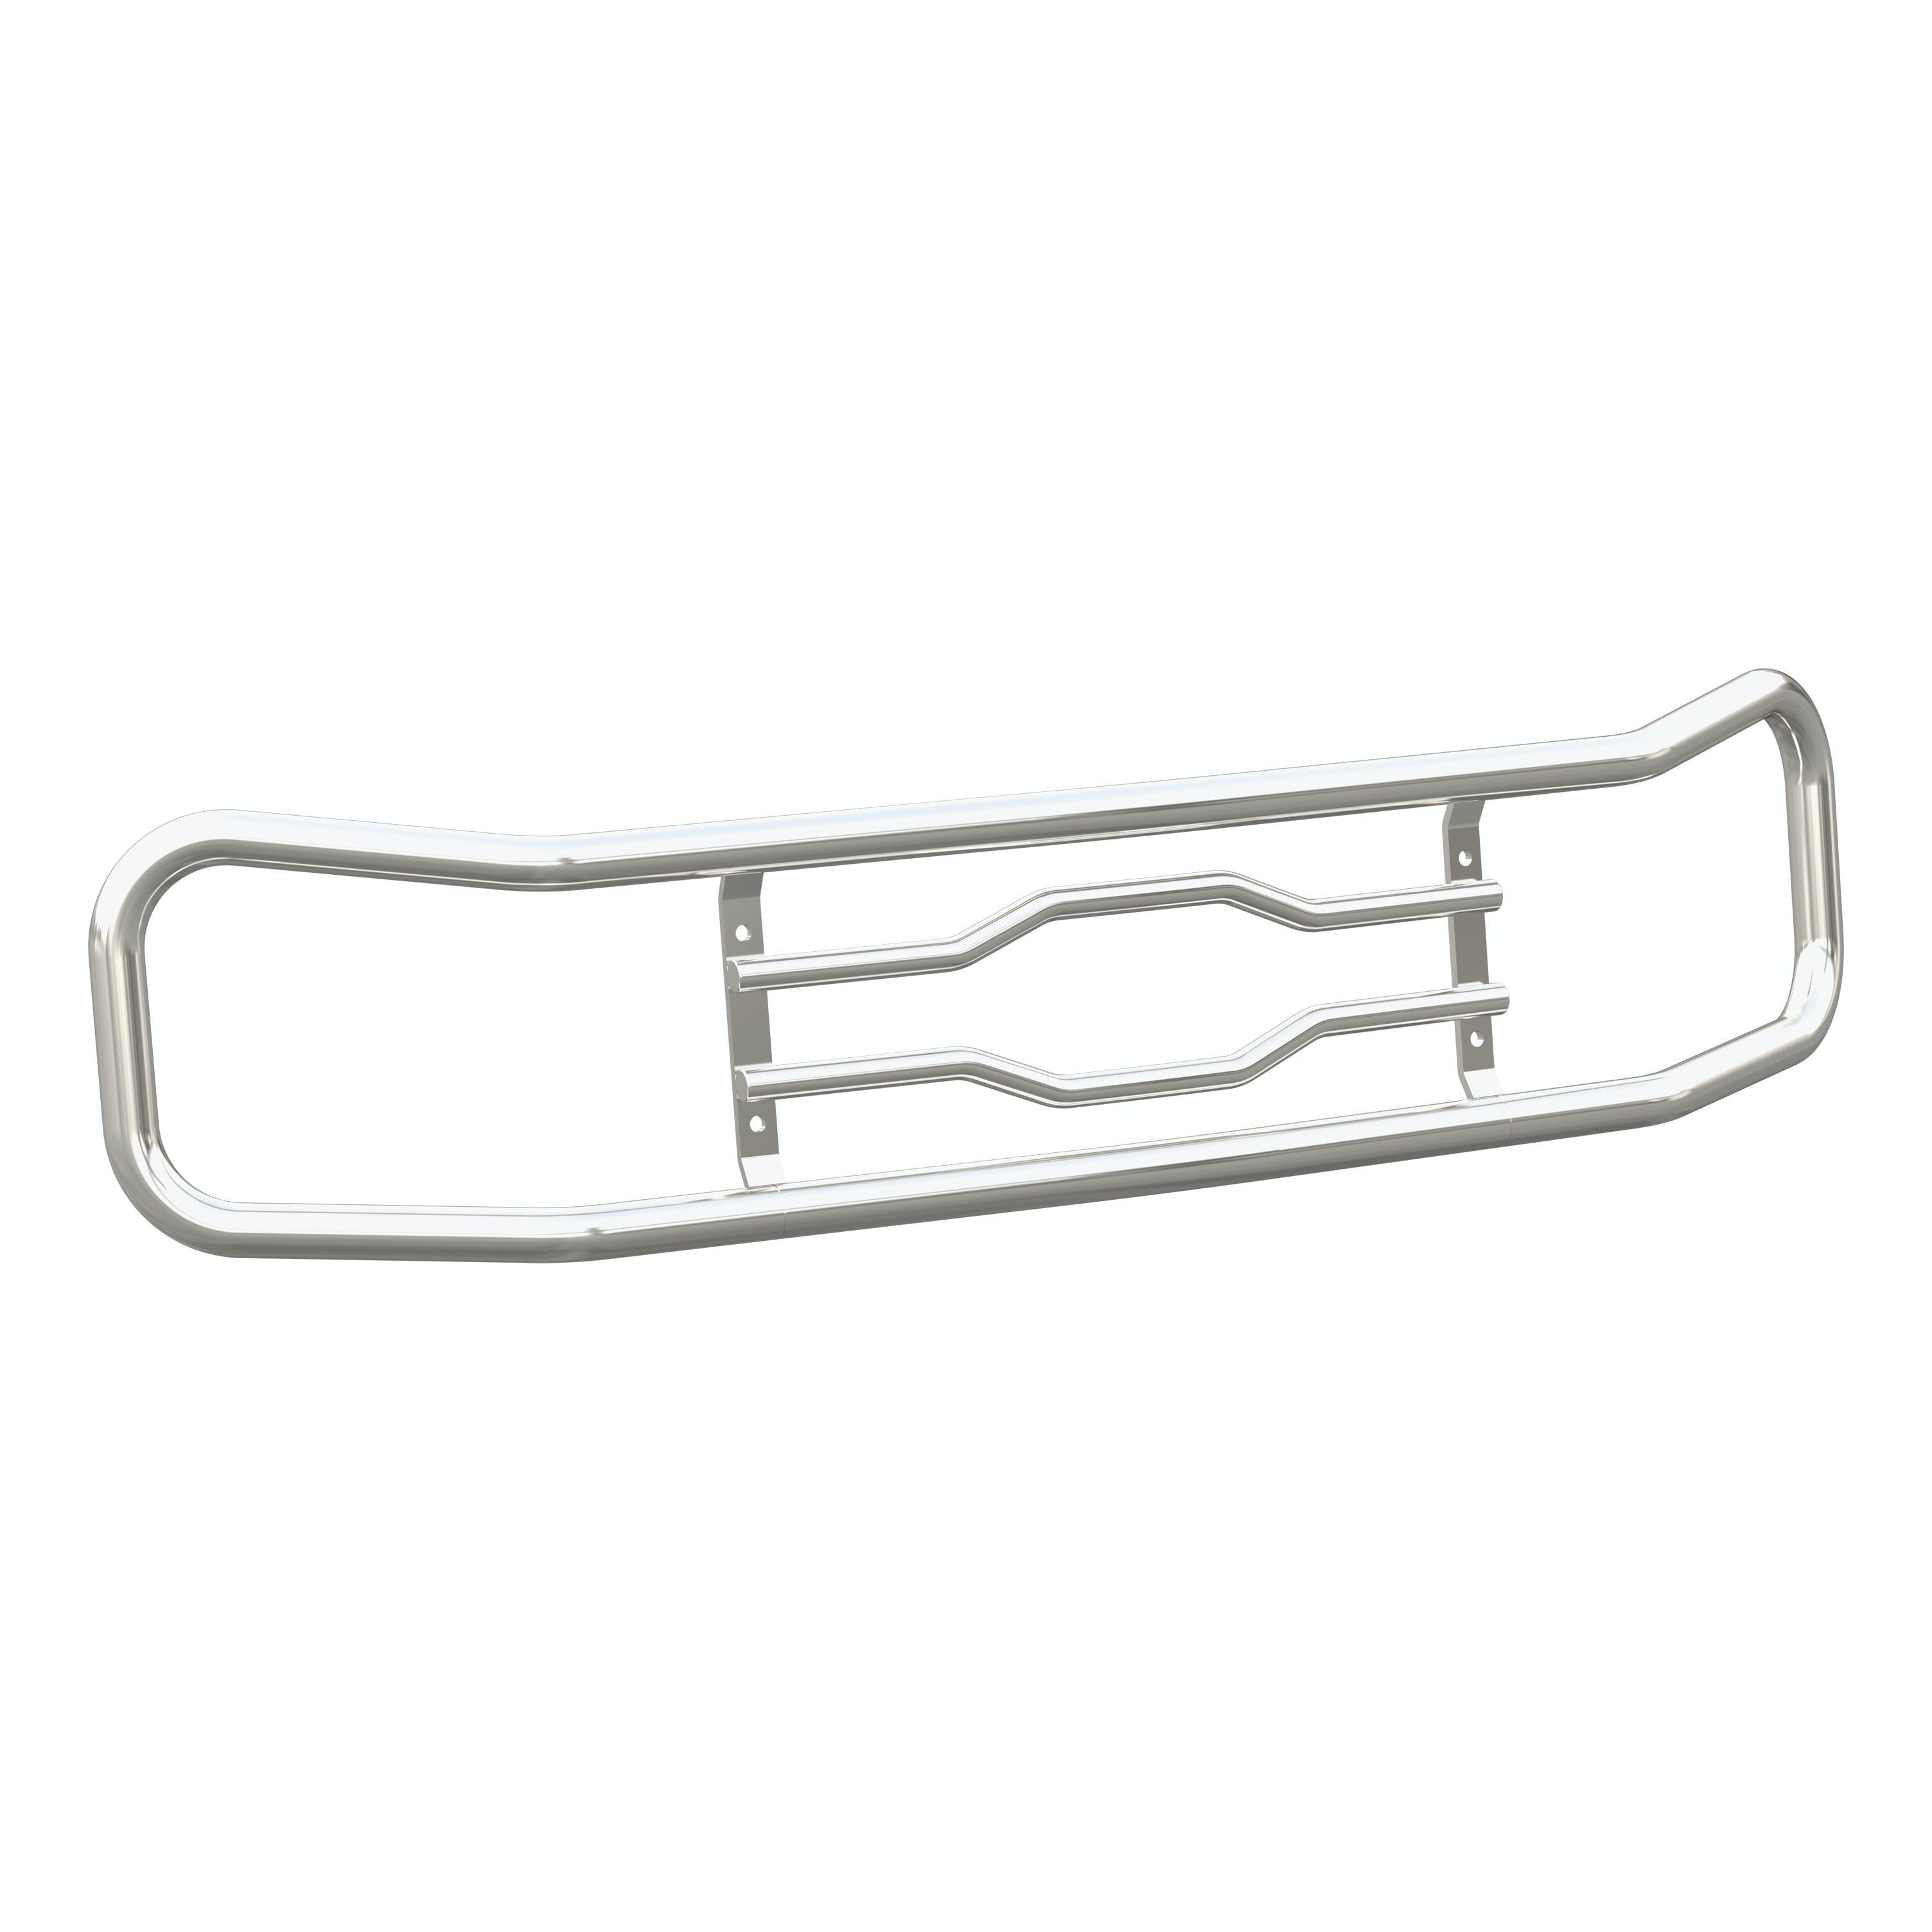 LUVERNE 330719 2 inch Tubular Grille Guard Ring Assembly